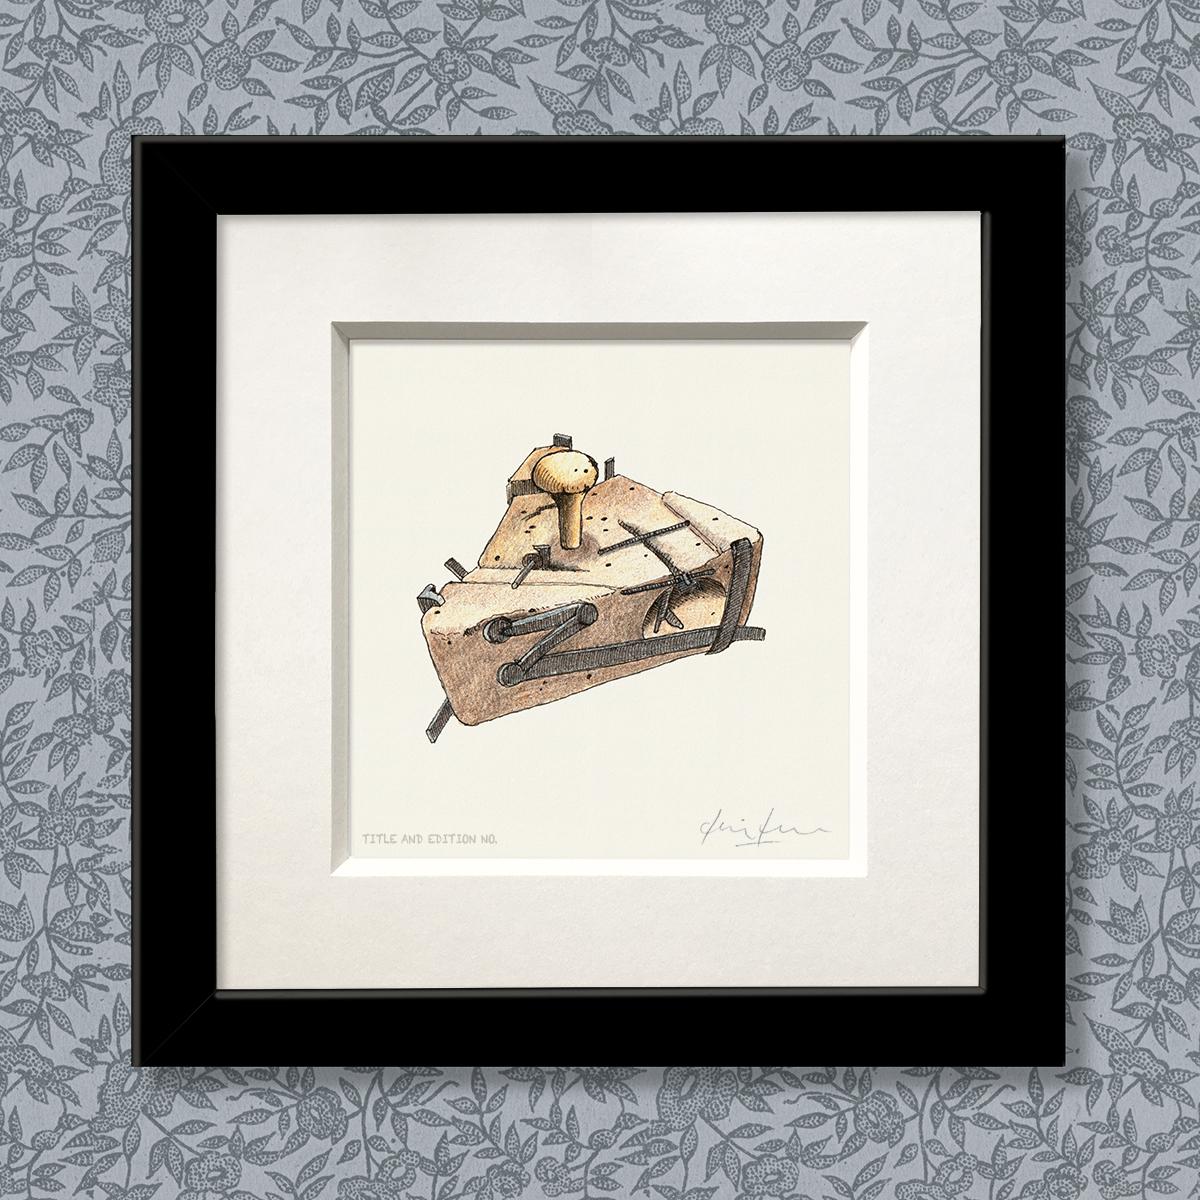 Limited edition print from pen & ink and coloured pencil drawing of an old mousetrap in a black frame